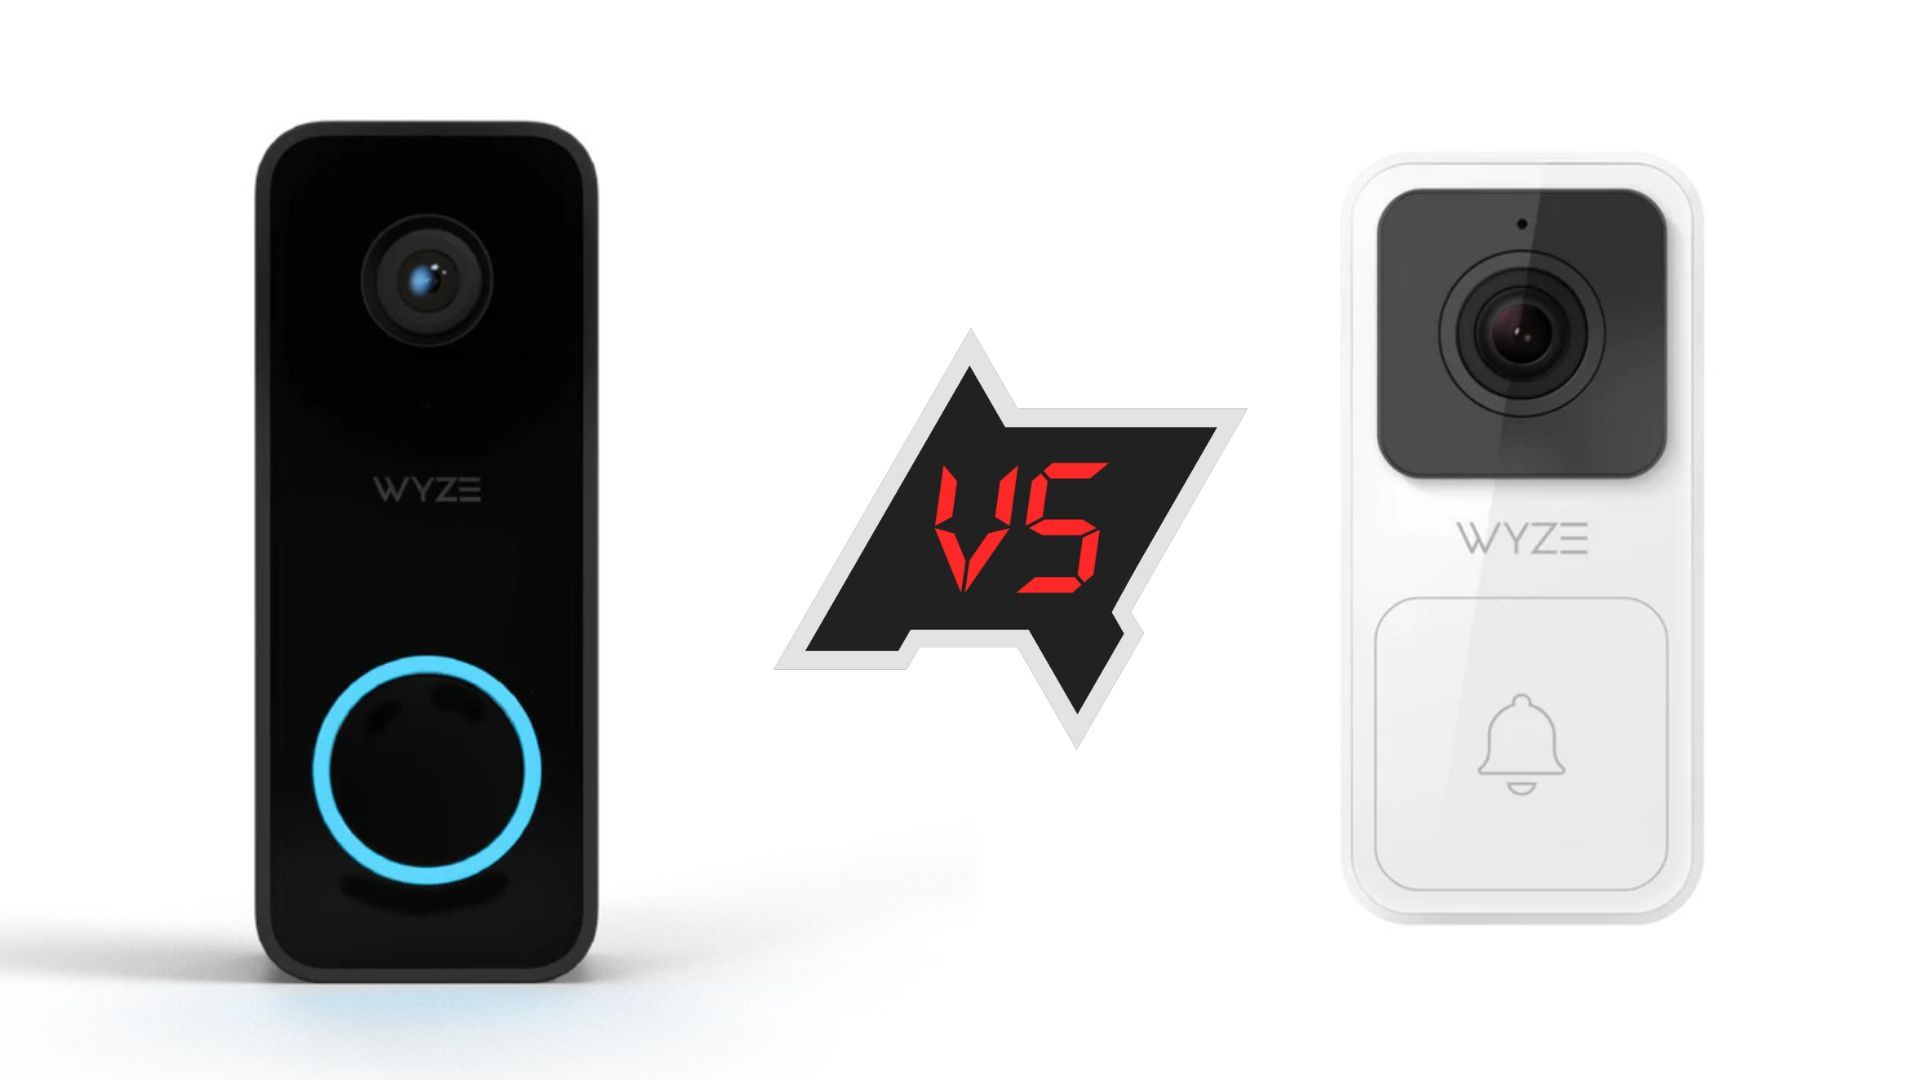 The Wyze Video Doorbell v2 and Wyze Video Doorbell (Wired) against a white background